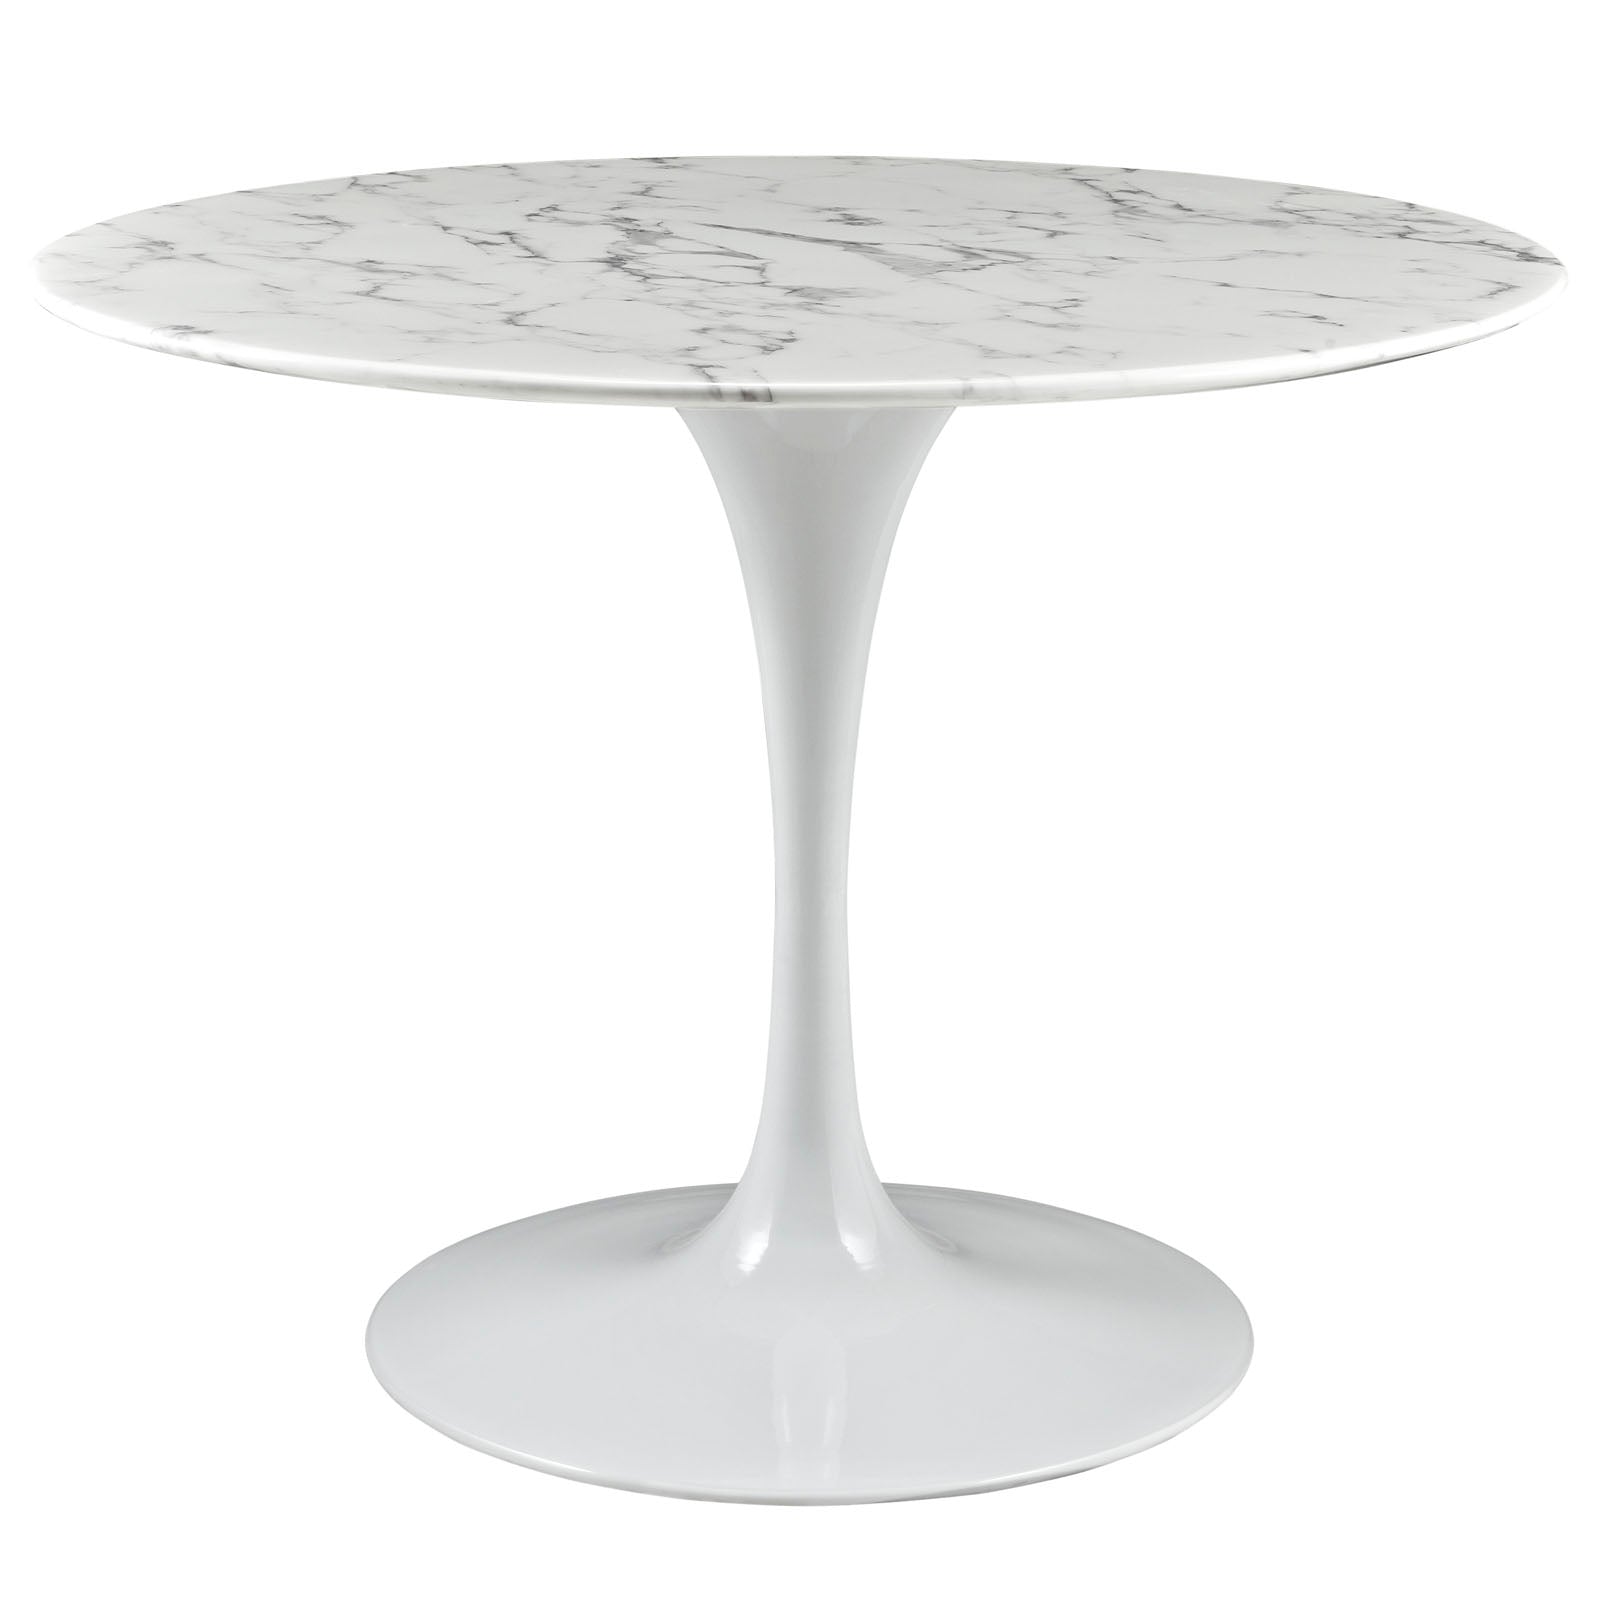 Lippa 40" Round Artifical Marble Dining Room Table Set - Modern Dining Table Set